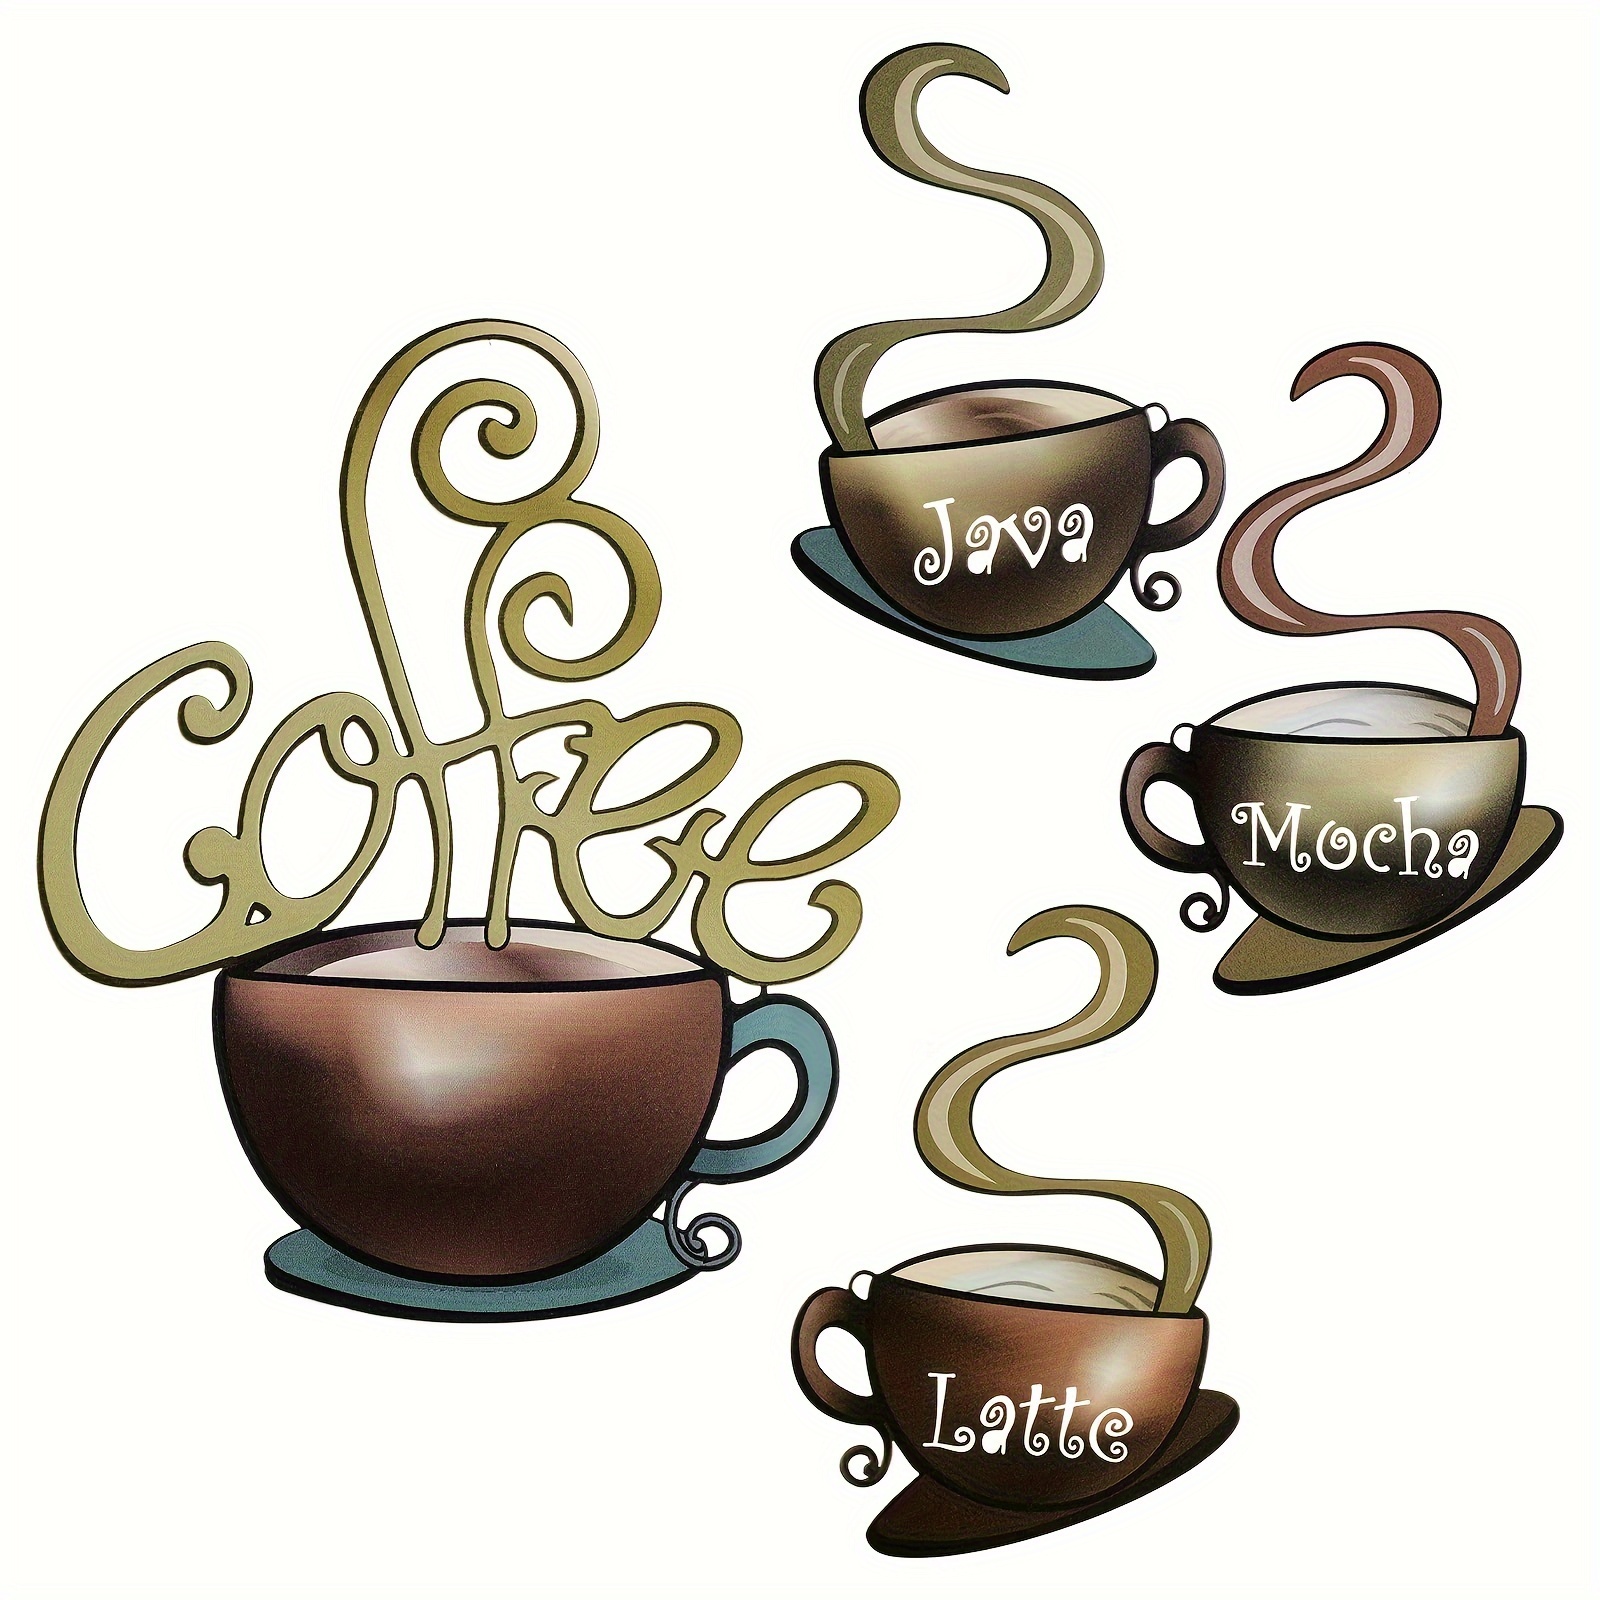 

4 Pieces Metal Coffee Cup Wall Decor With Americana Style, Reusable Self-adhesive Irregular Shaped Vintage Signs For Kitchen, Bar, Cafe, Restaurant And Lounge Decorations